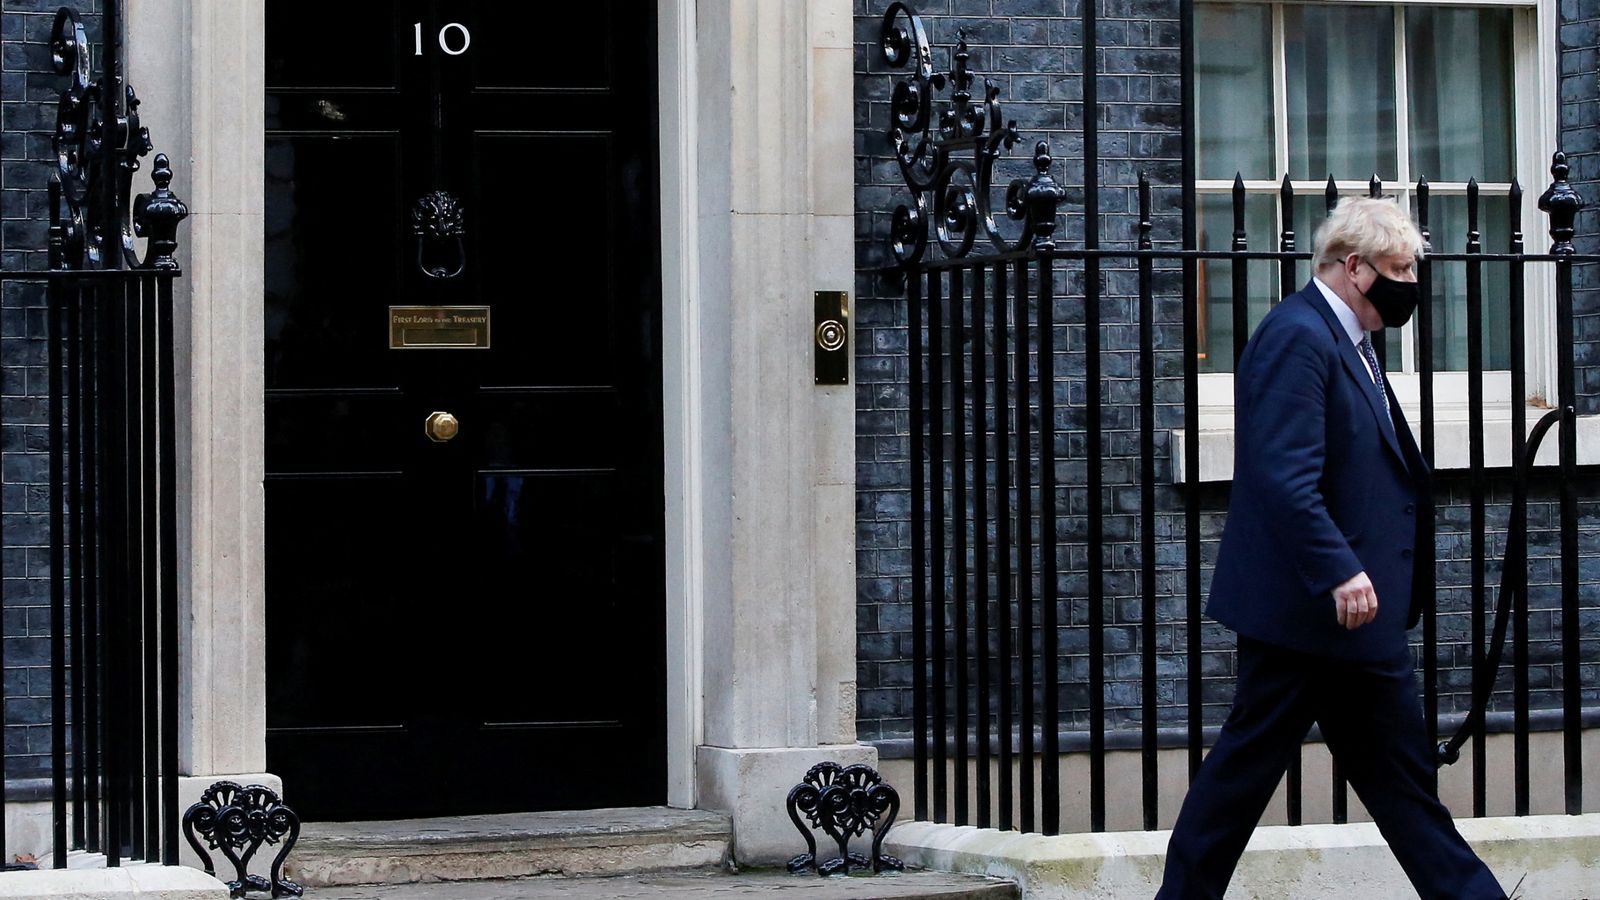 Boris Johnson: Tory chairman Oliver Dowden 'disgusted' by Downing Street 'partygate' scandal and calls for culture change in Number 10 - Sky News